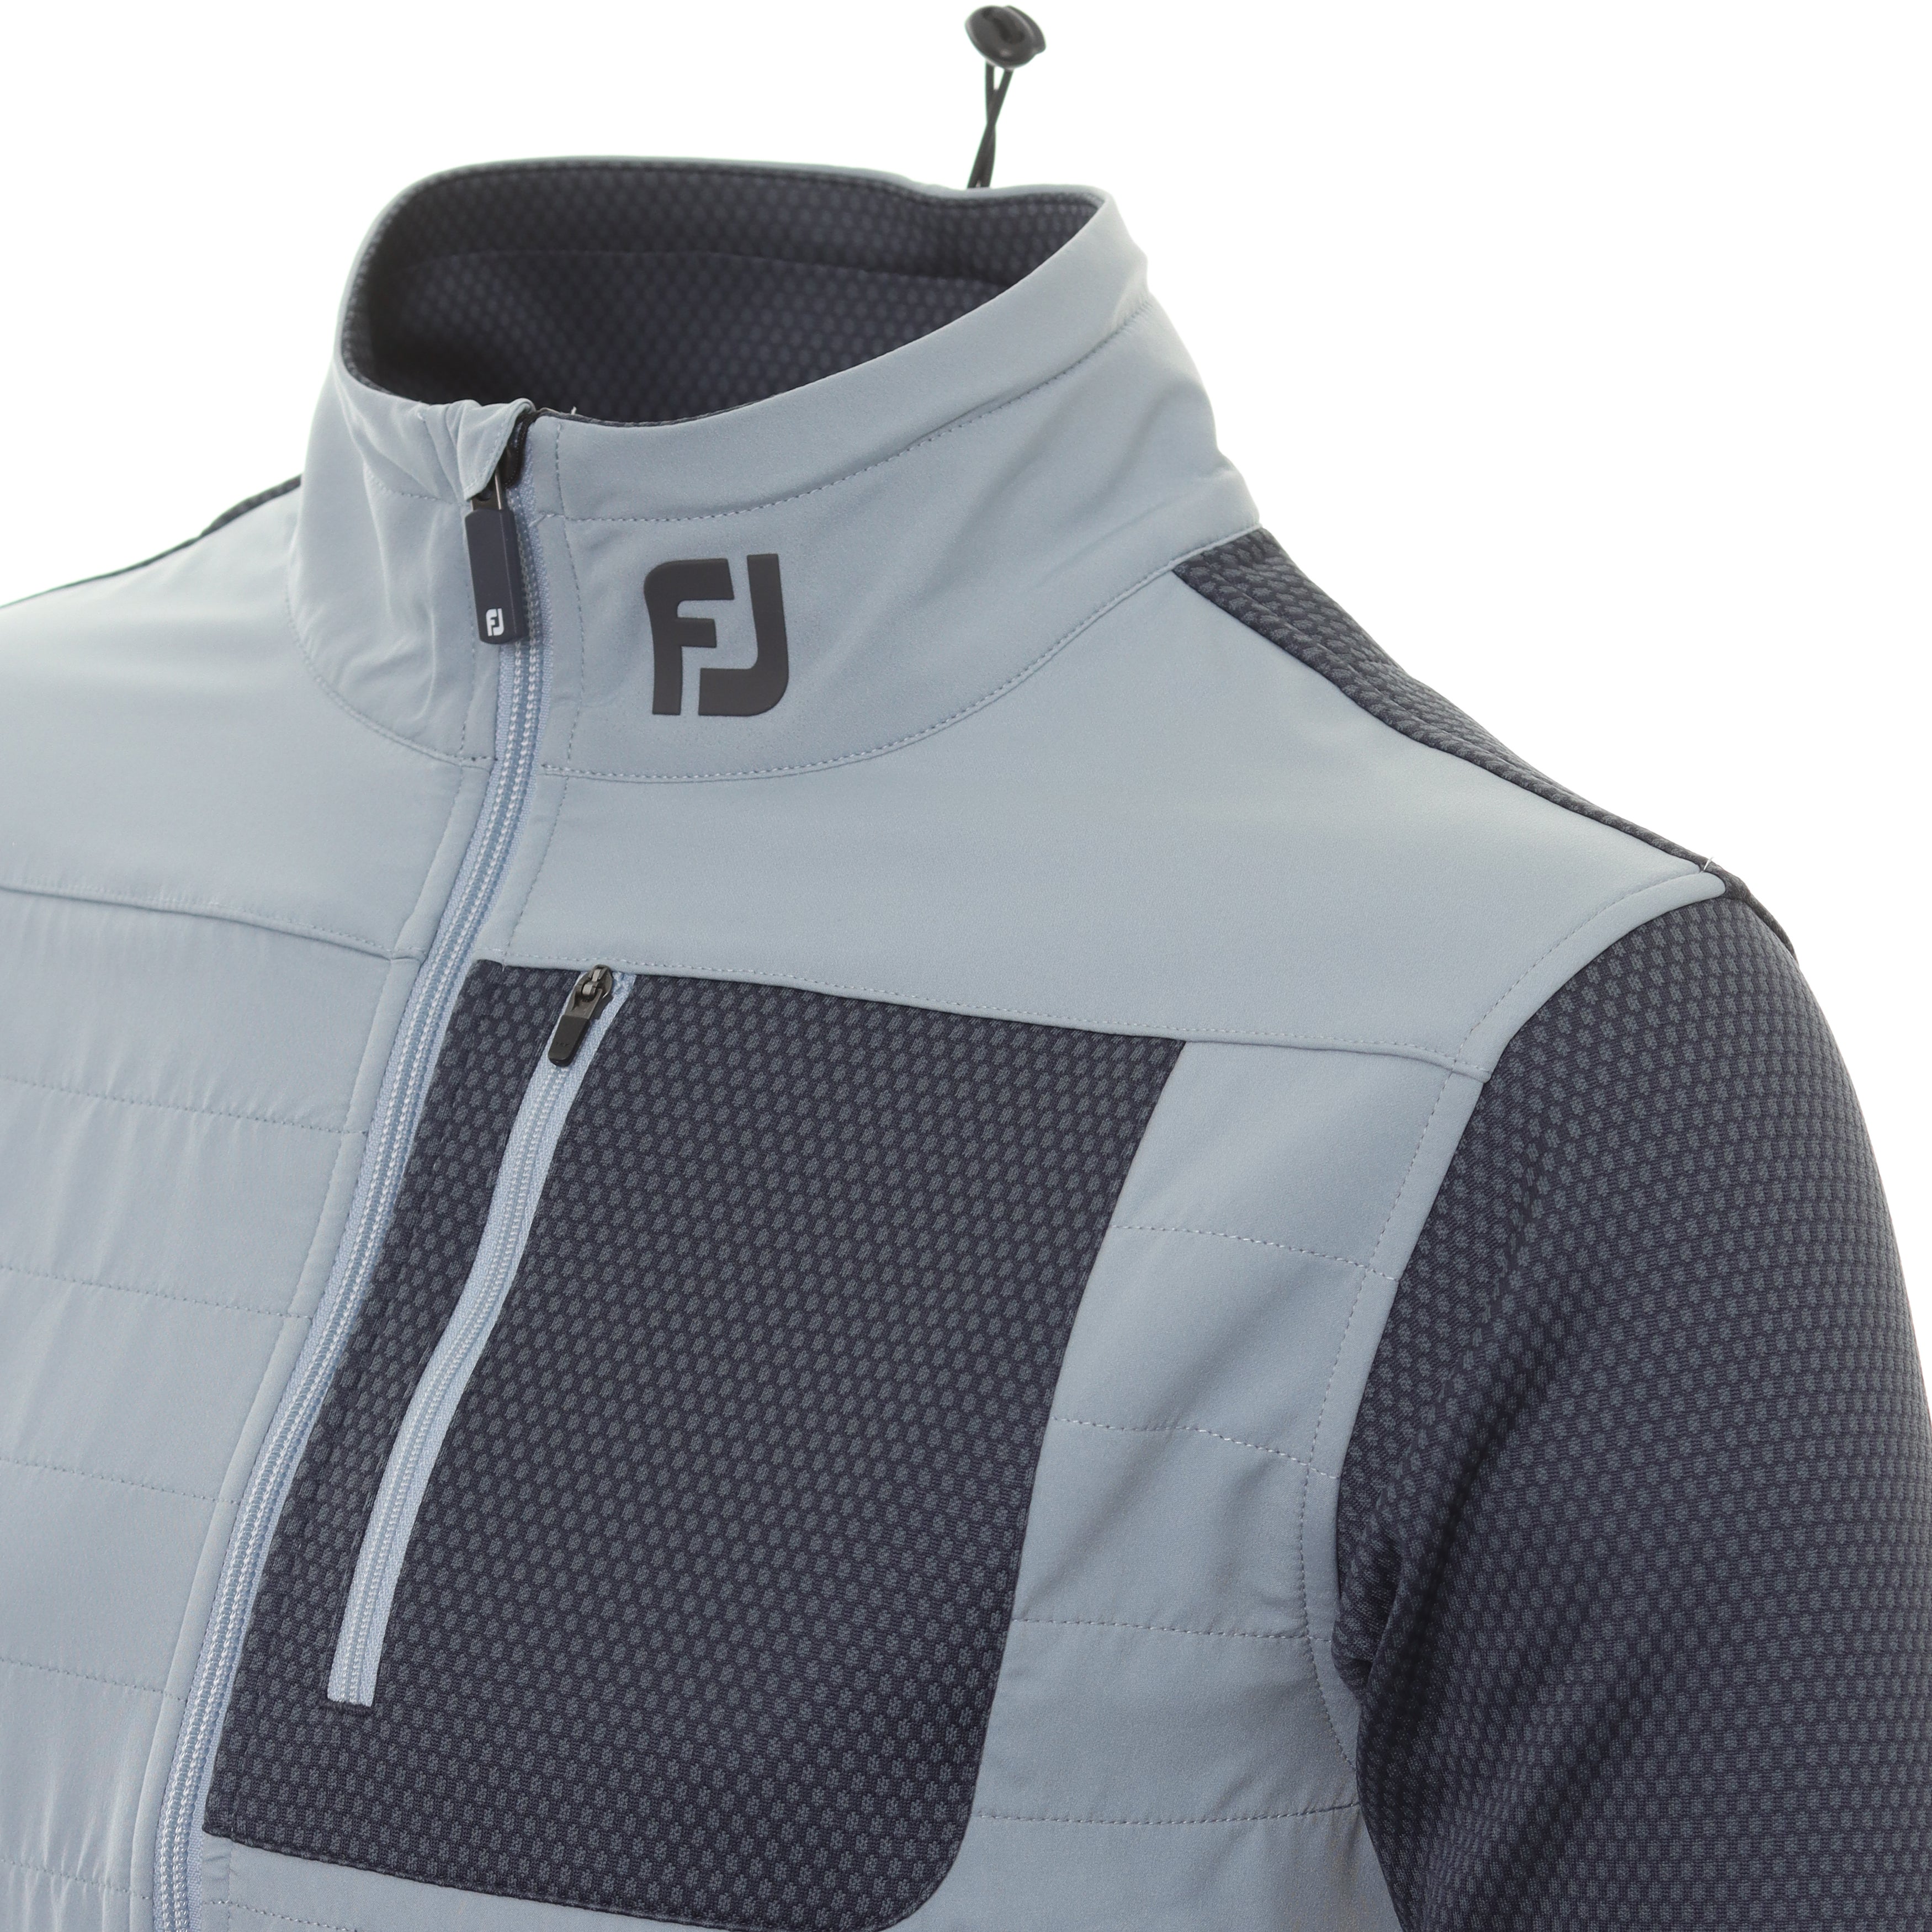 FootJoy ThermoSeries Hybrid Jacket 88808 Charcoal Grey